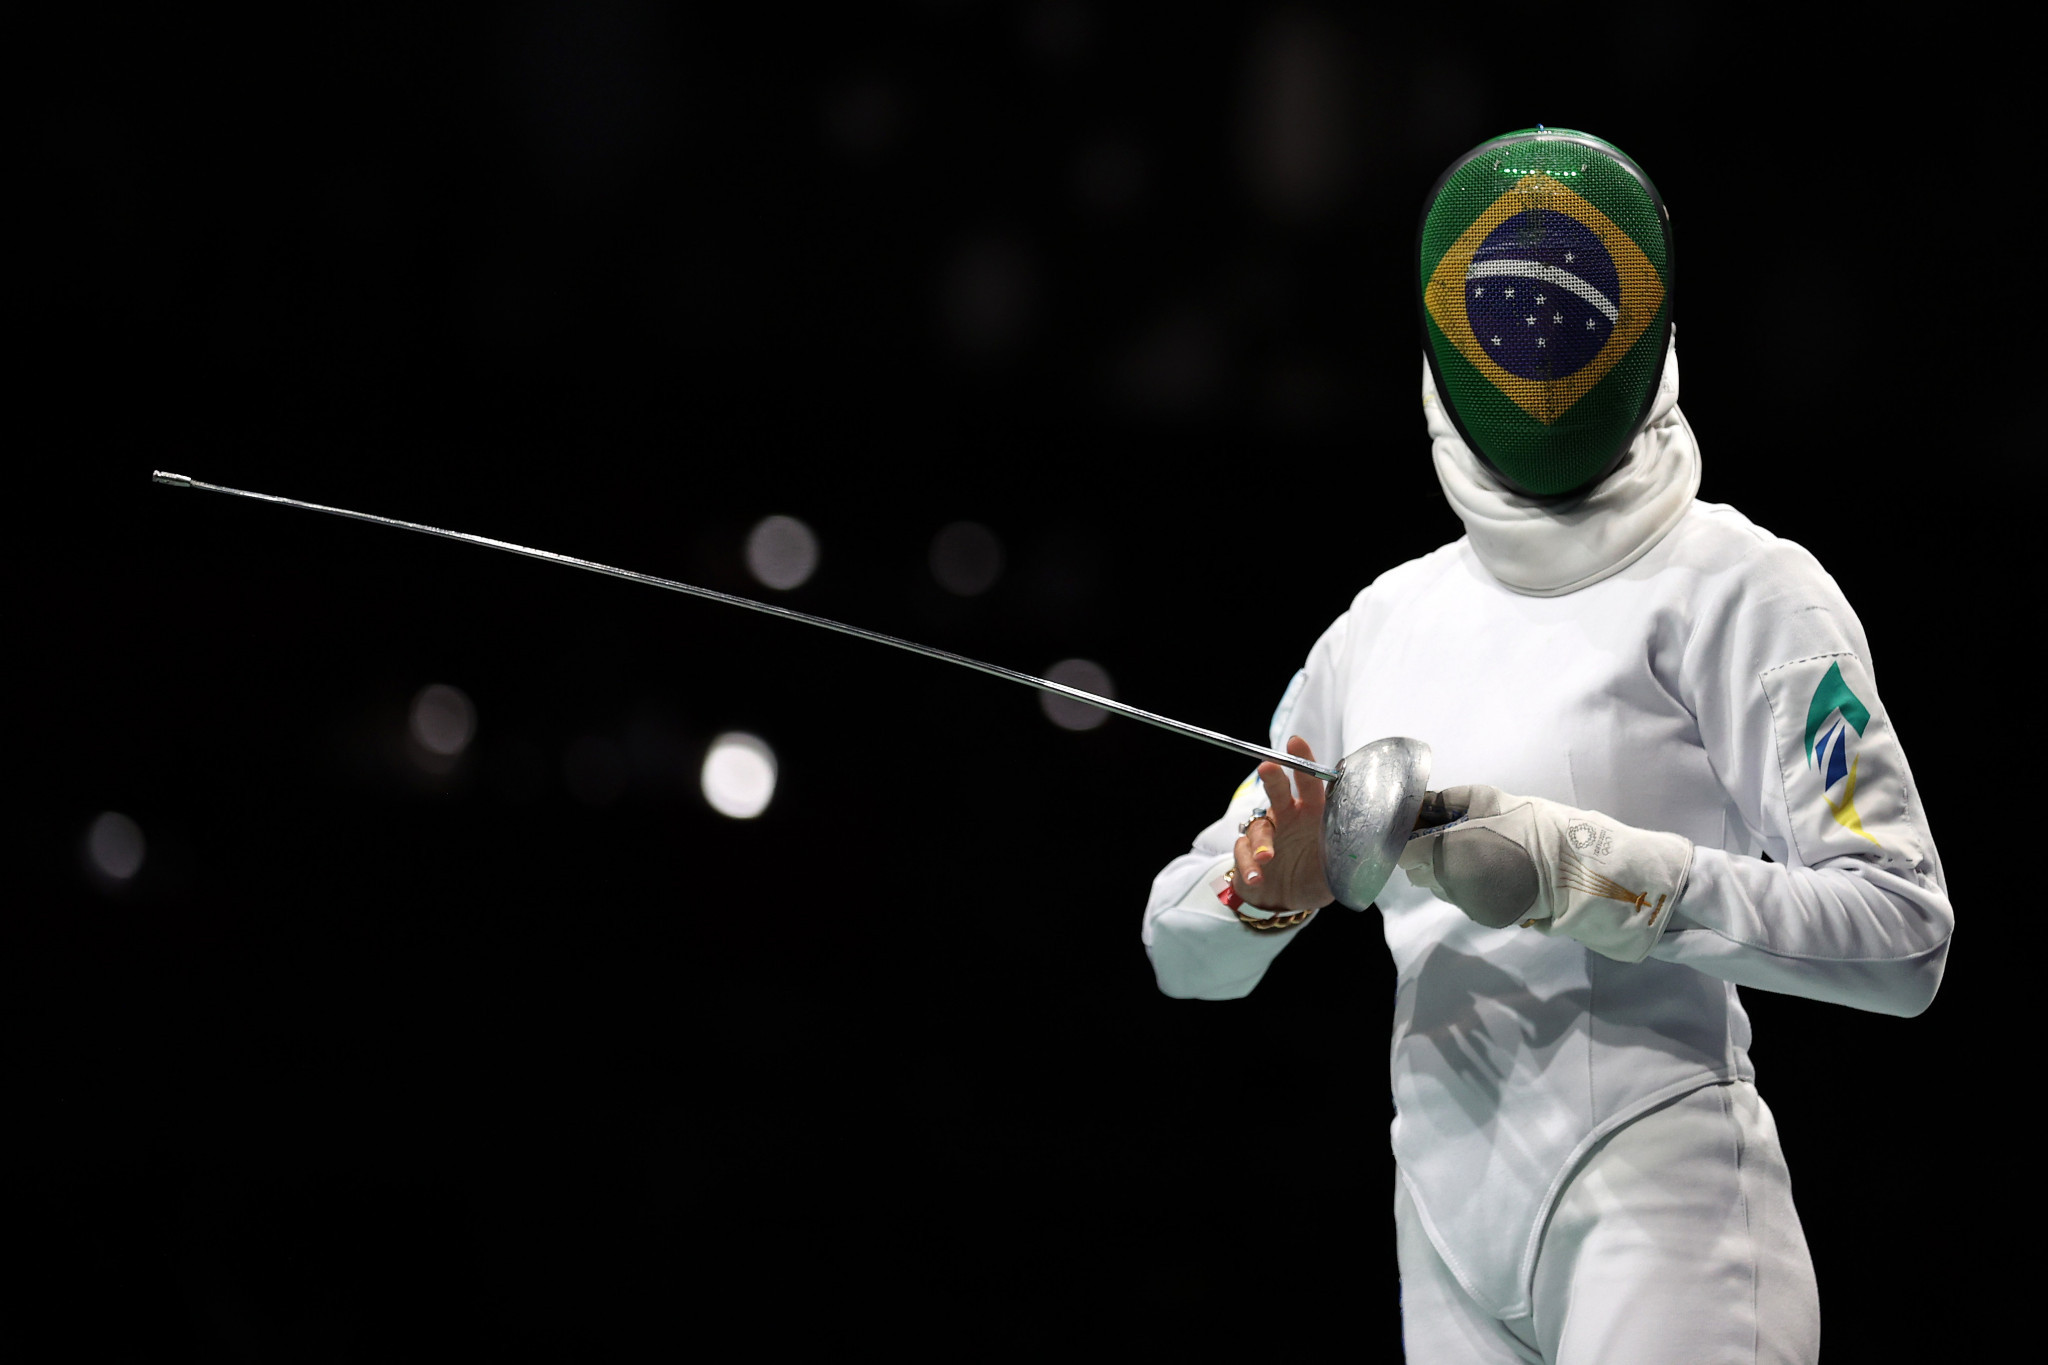 Individual world champion Moellhausen takes women’s épée crown at Fencing World Cup in Barcelona